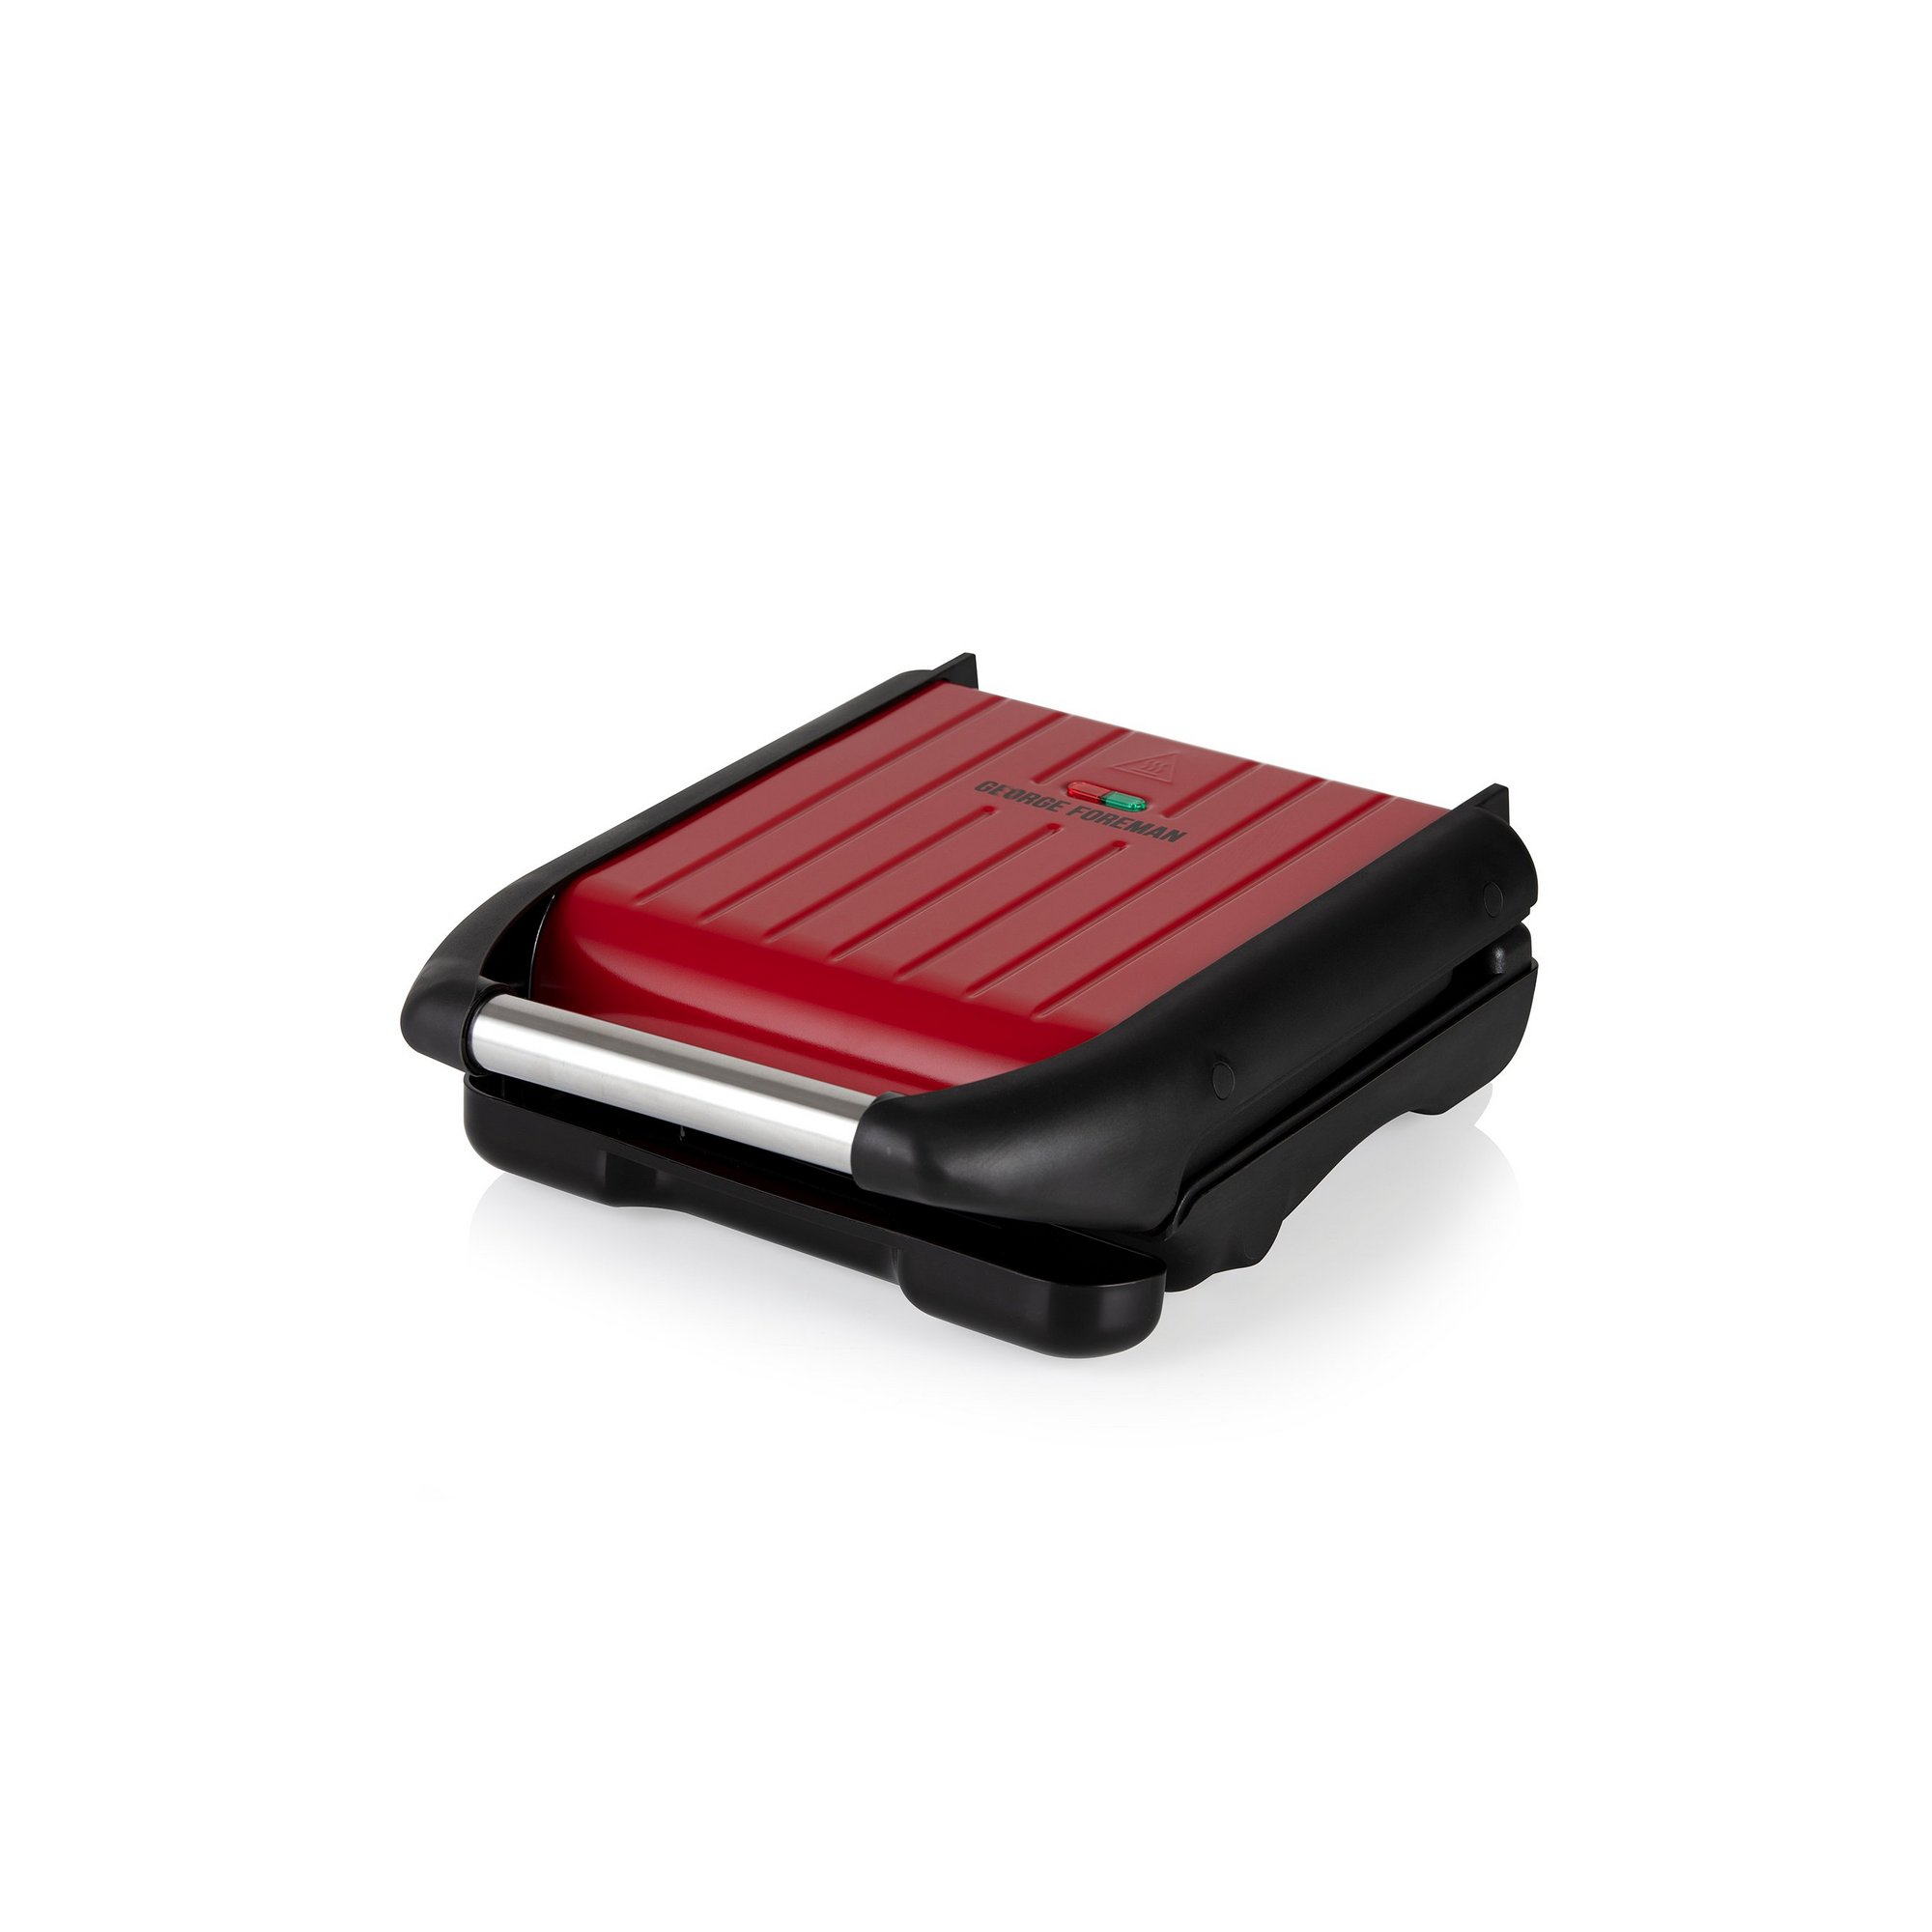 George Foreman Compact Red Grill